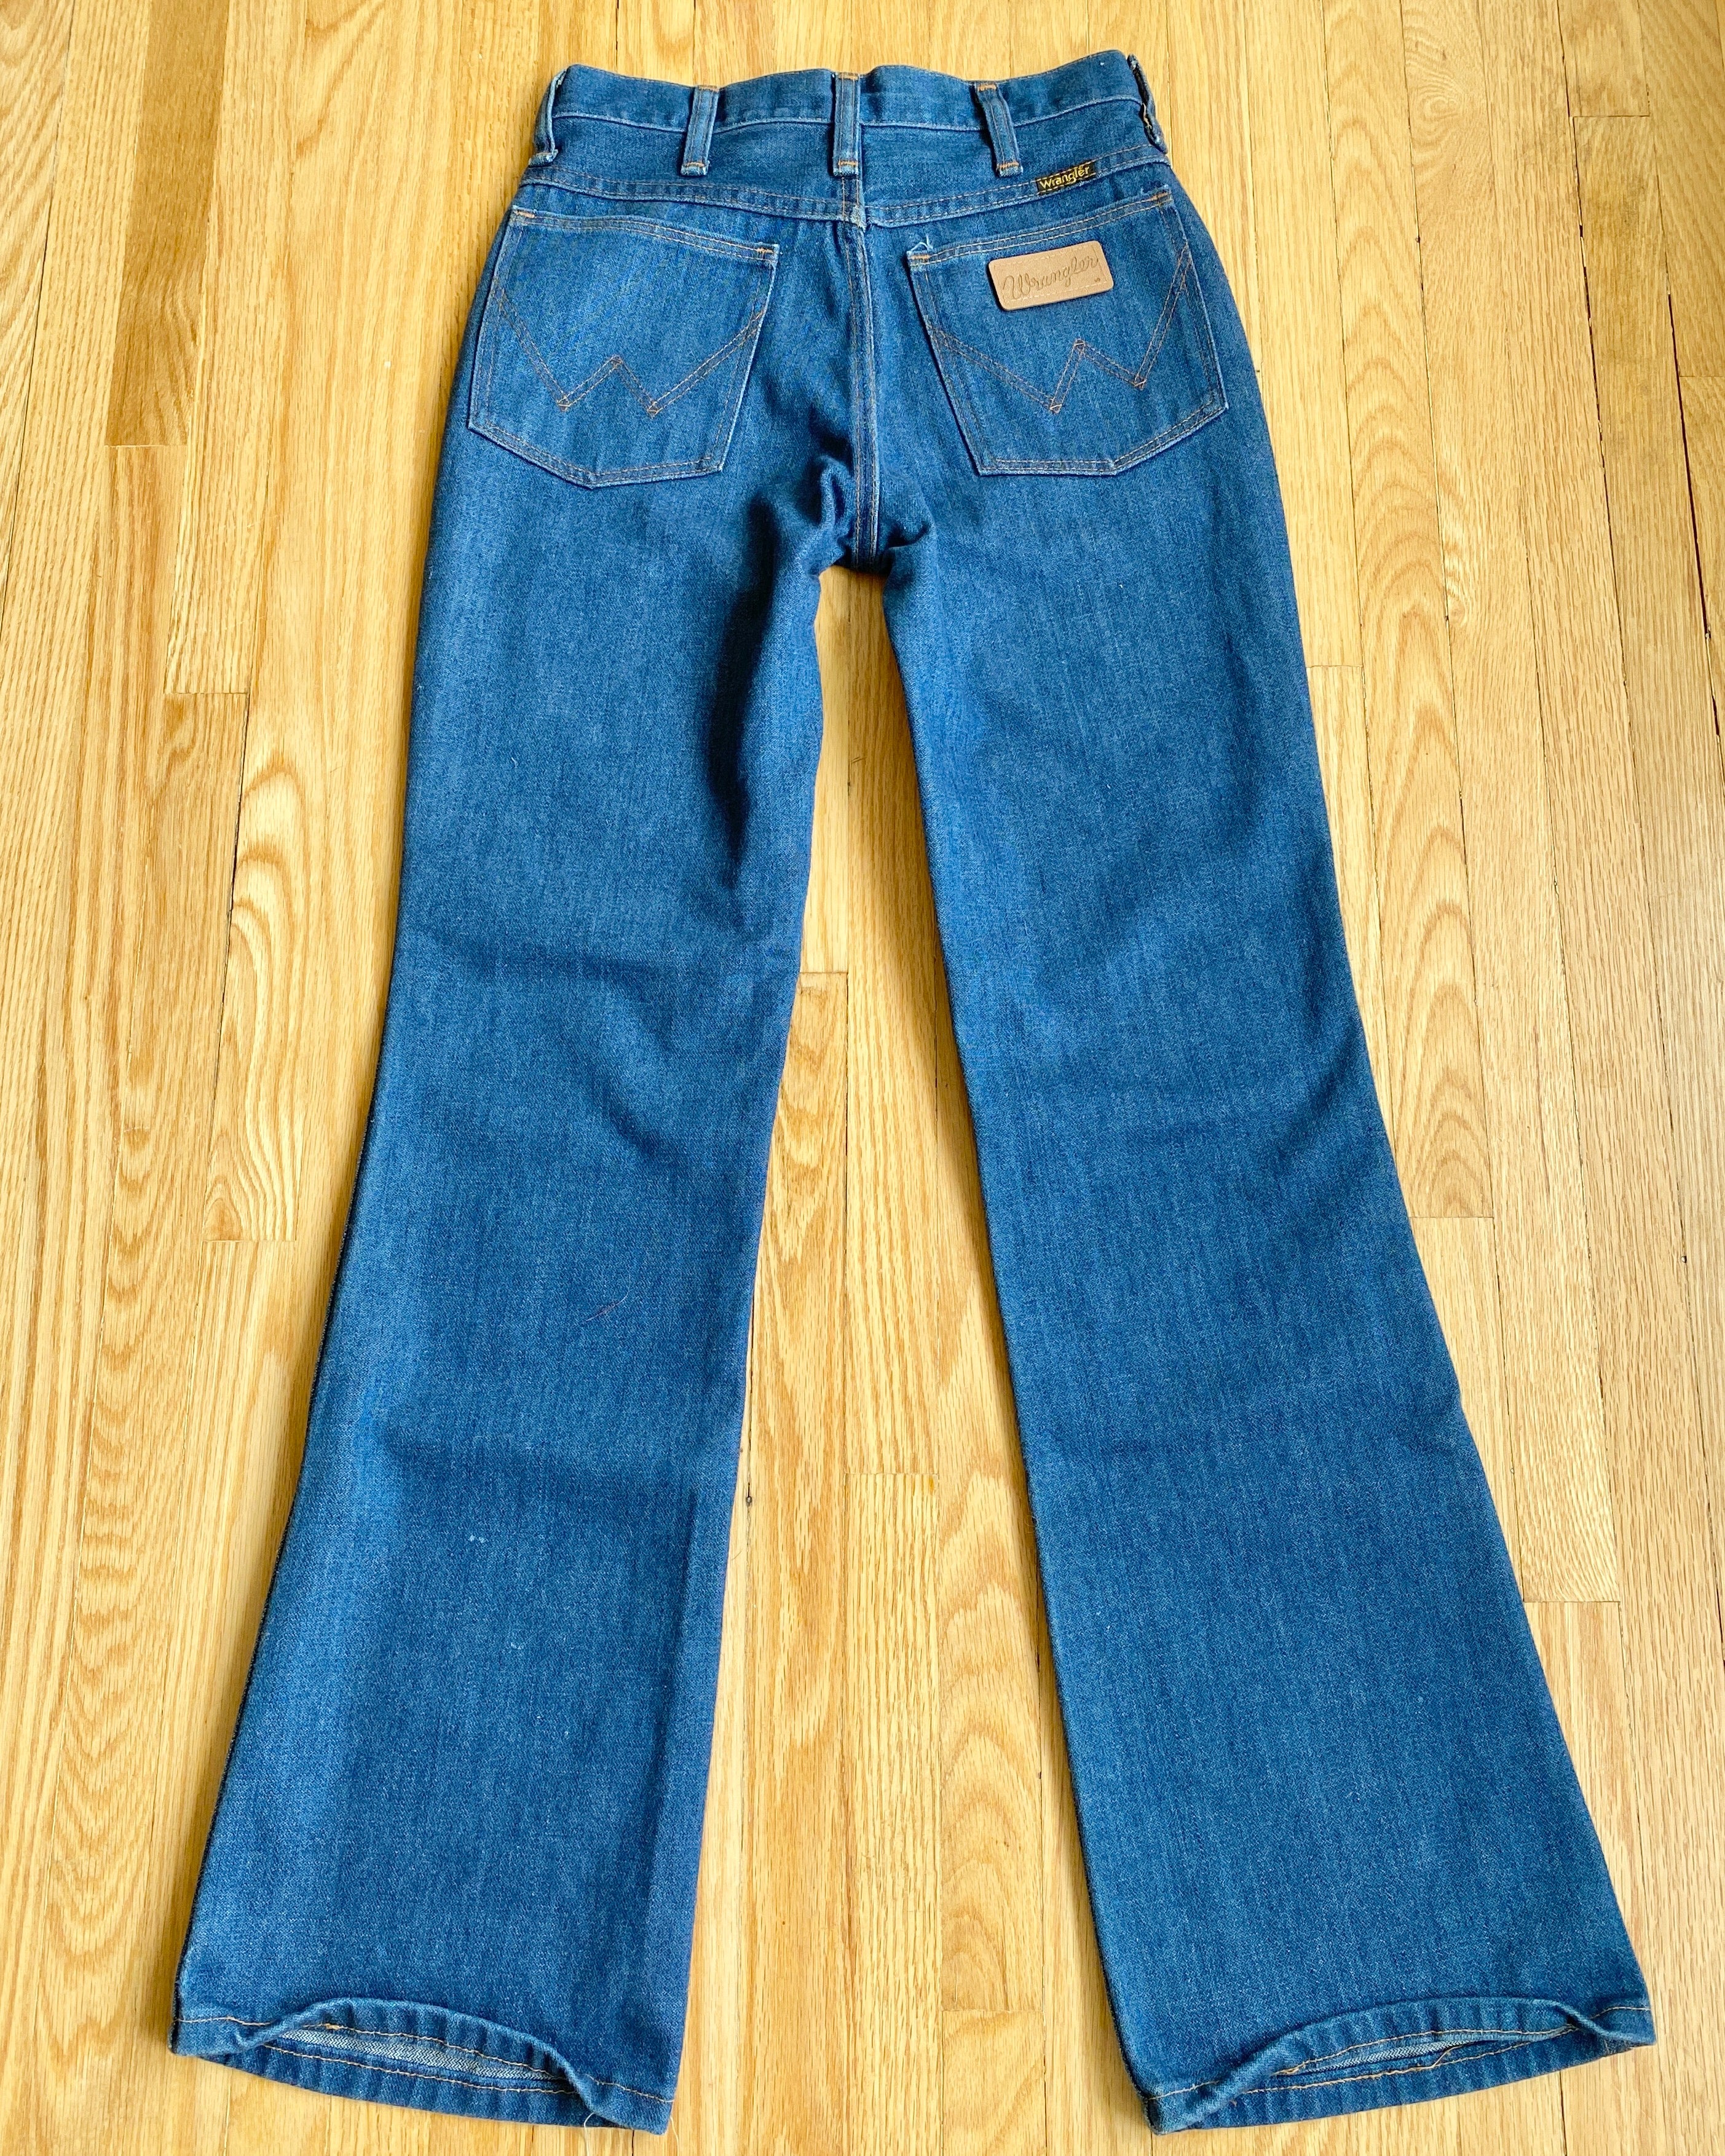 Vintage Wranglers Dark Wash Jeans Made in USA size 26 to 27 – Ardith